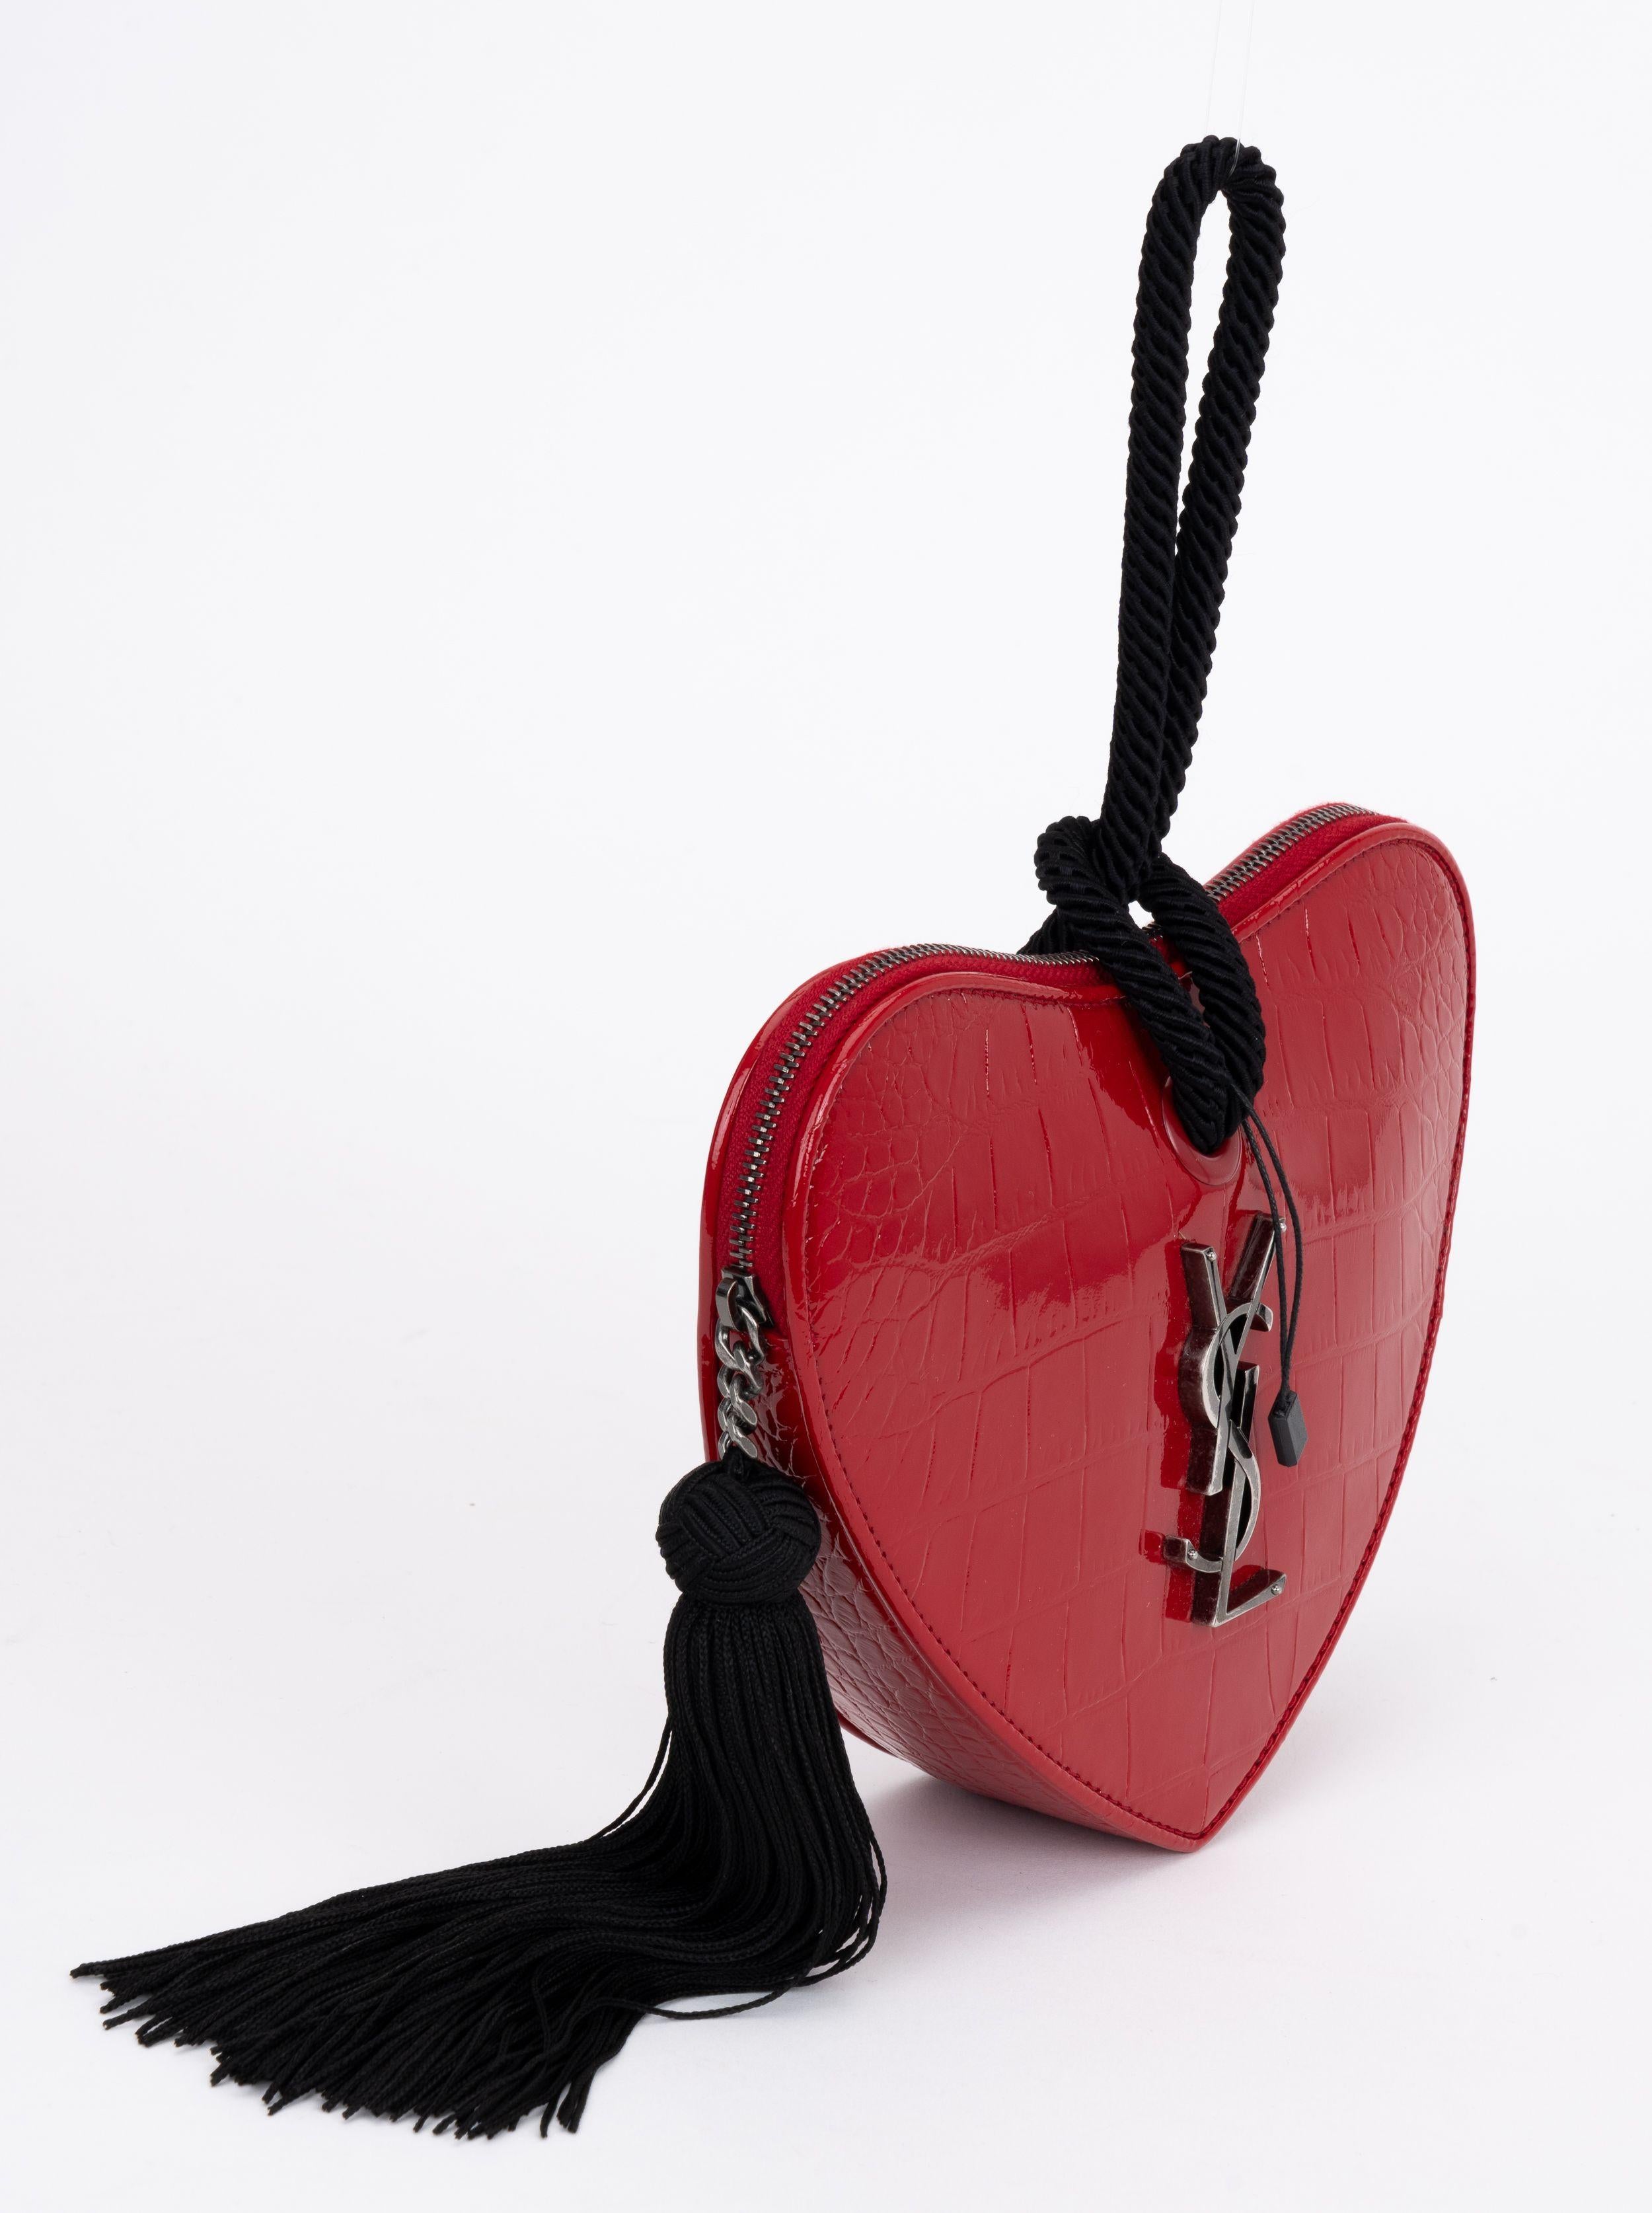 YSL new red patent embossed croc leather heart shaped clutch with black handle and silk tassel. Front silver YSL logo. Bag can fit a cell phone inside. Comes with booklet and original dust cover.